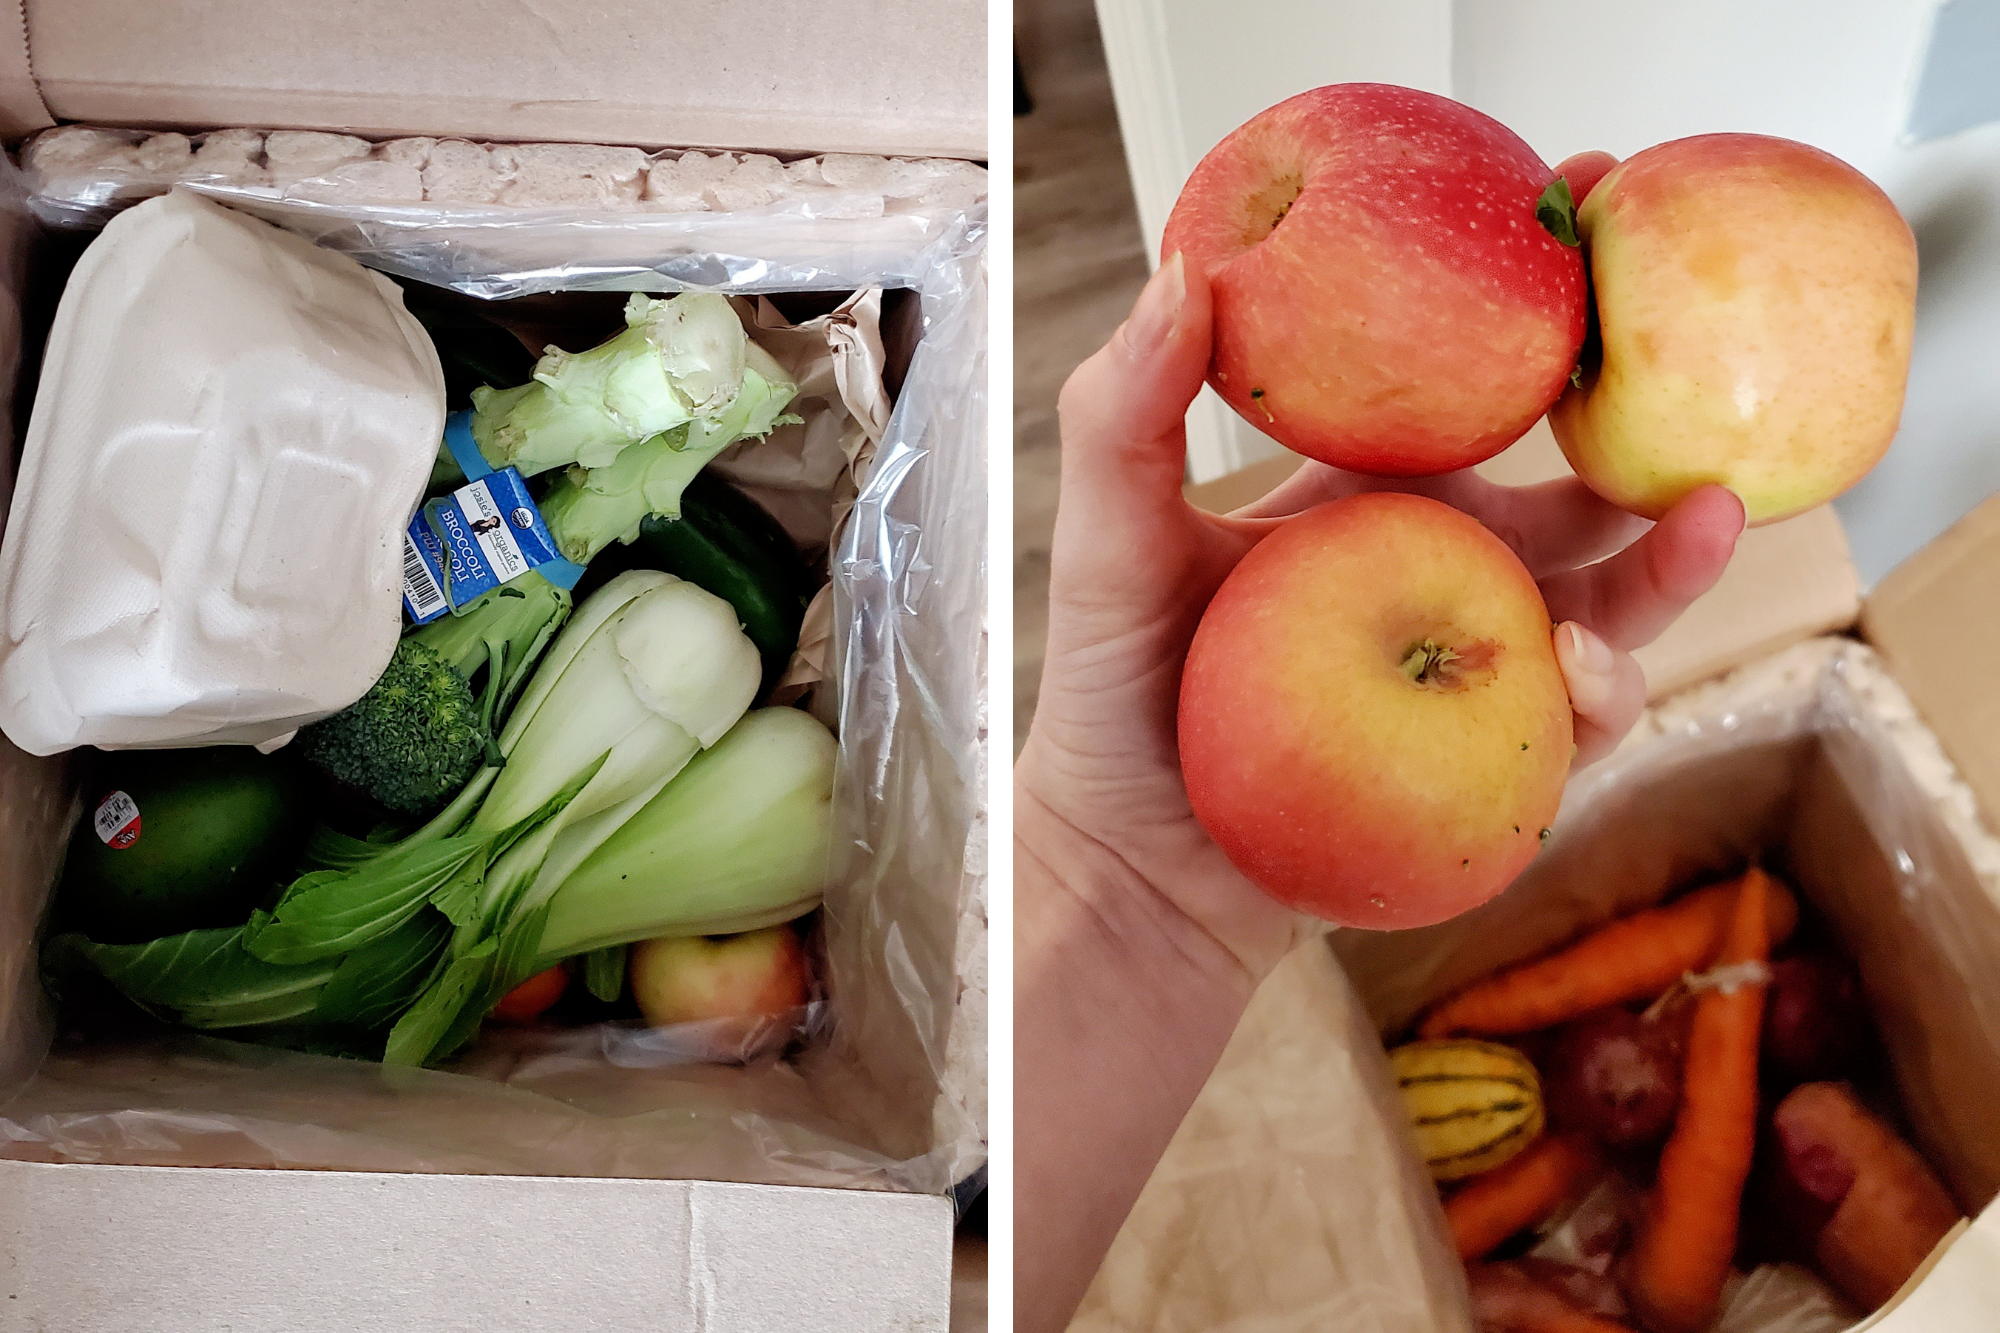 left: a cardboard box containing celery, broccoli, bok choy, and other veggies; right: Alyssa's hand holding three apples, beneath them is the rest of the box which has lots of carrots and a delicata squash